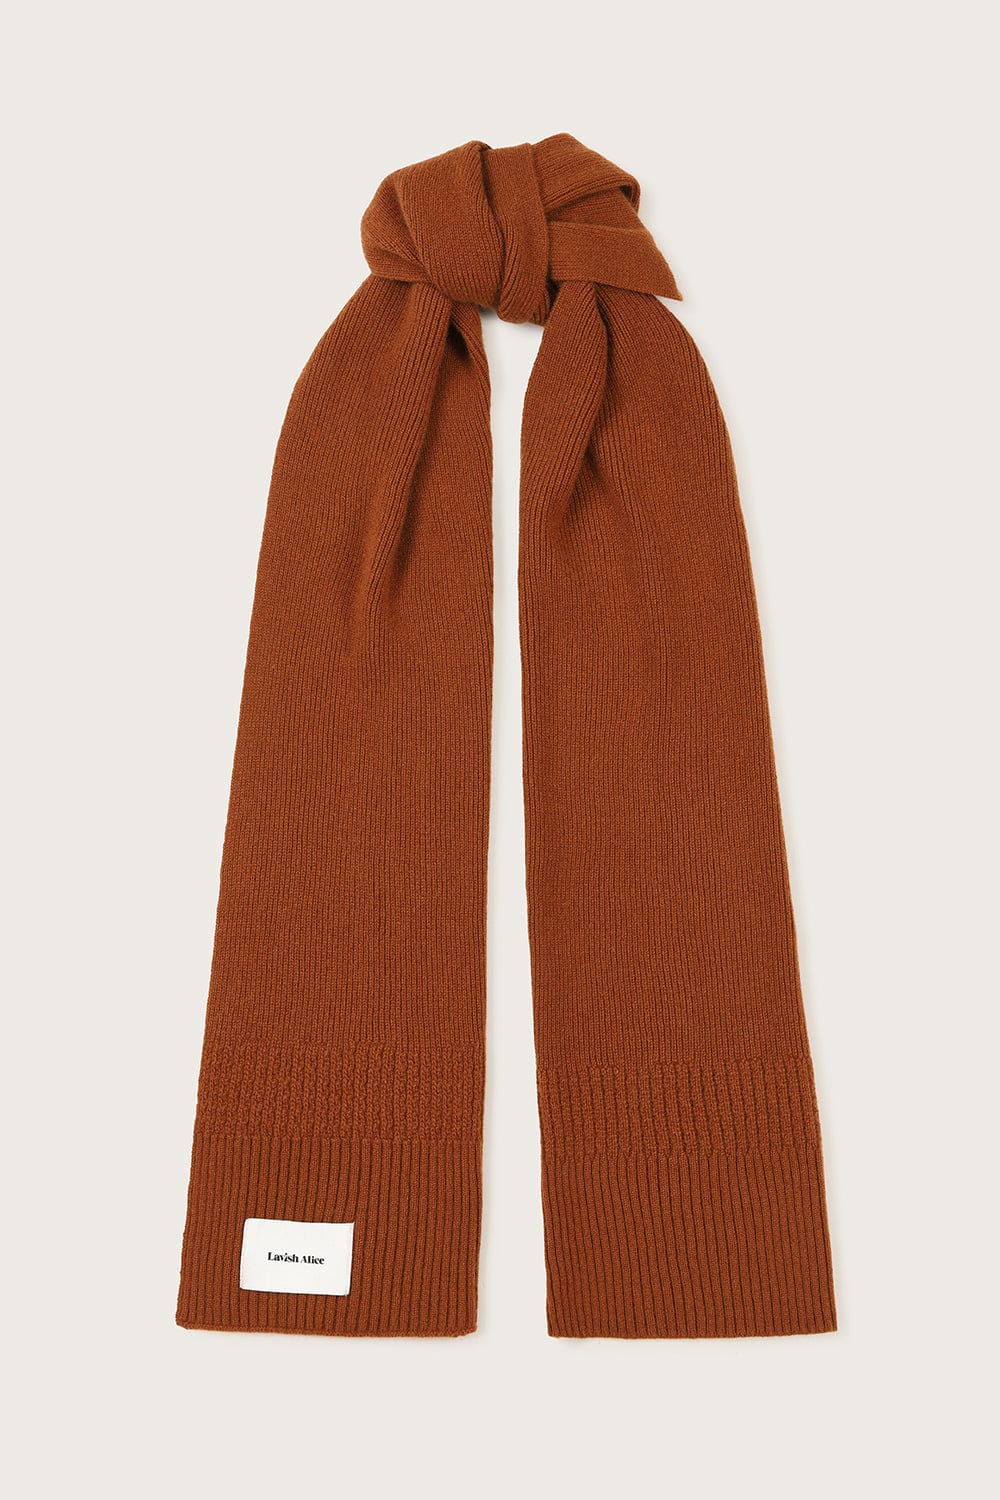 ZOHA Knitted Cashmere Blend Scarf in Camel